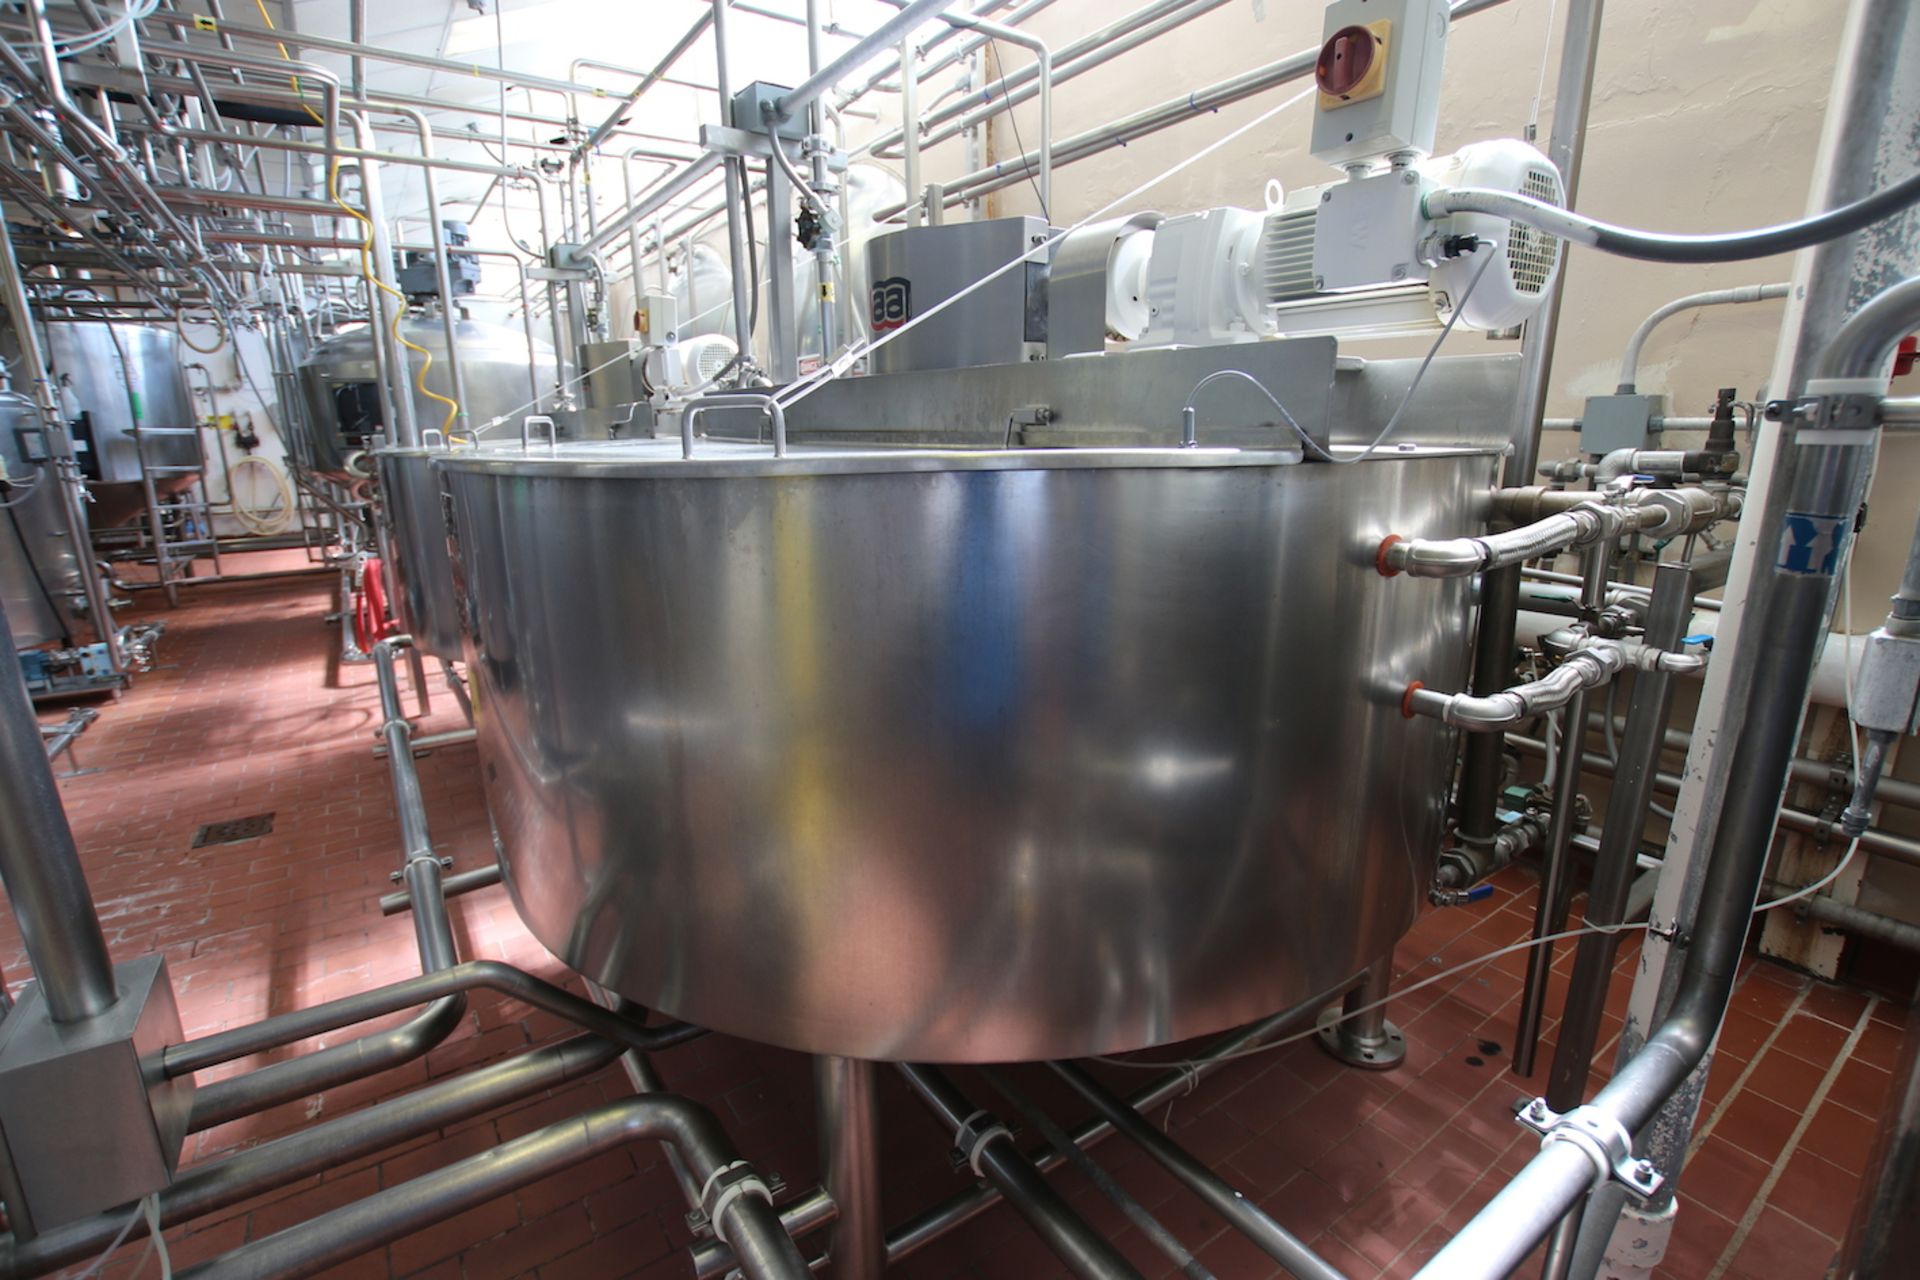 Lee 250 Gal. Cone Bottom S/S Kettle / Processor, M/N 250U9MS, S/N 19108-1-3, Equipped with Sweep/ - Image 3 of 5